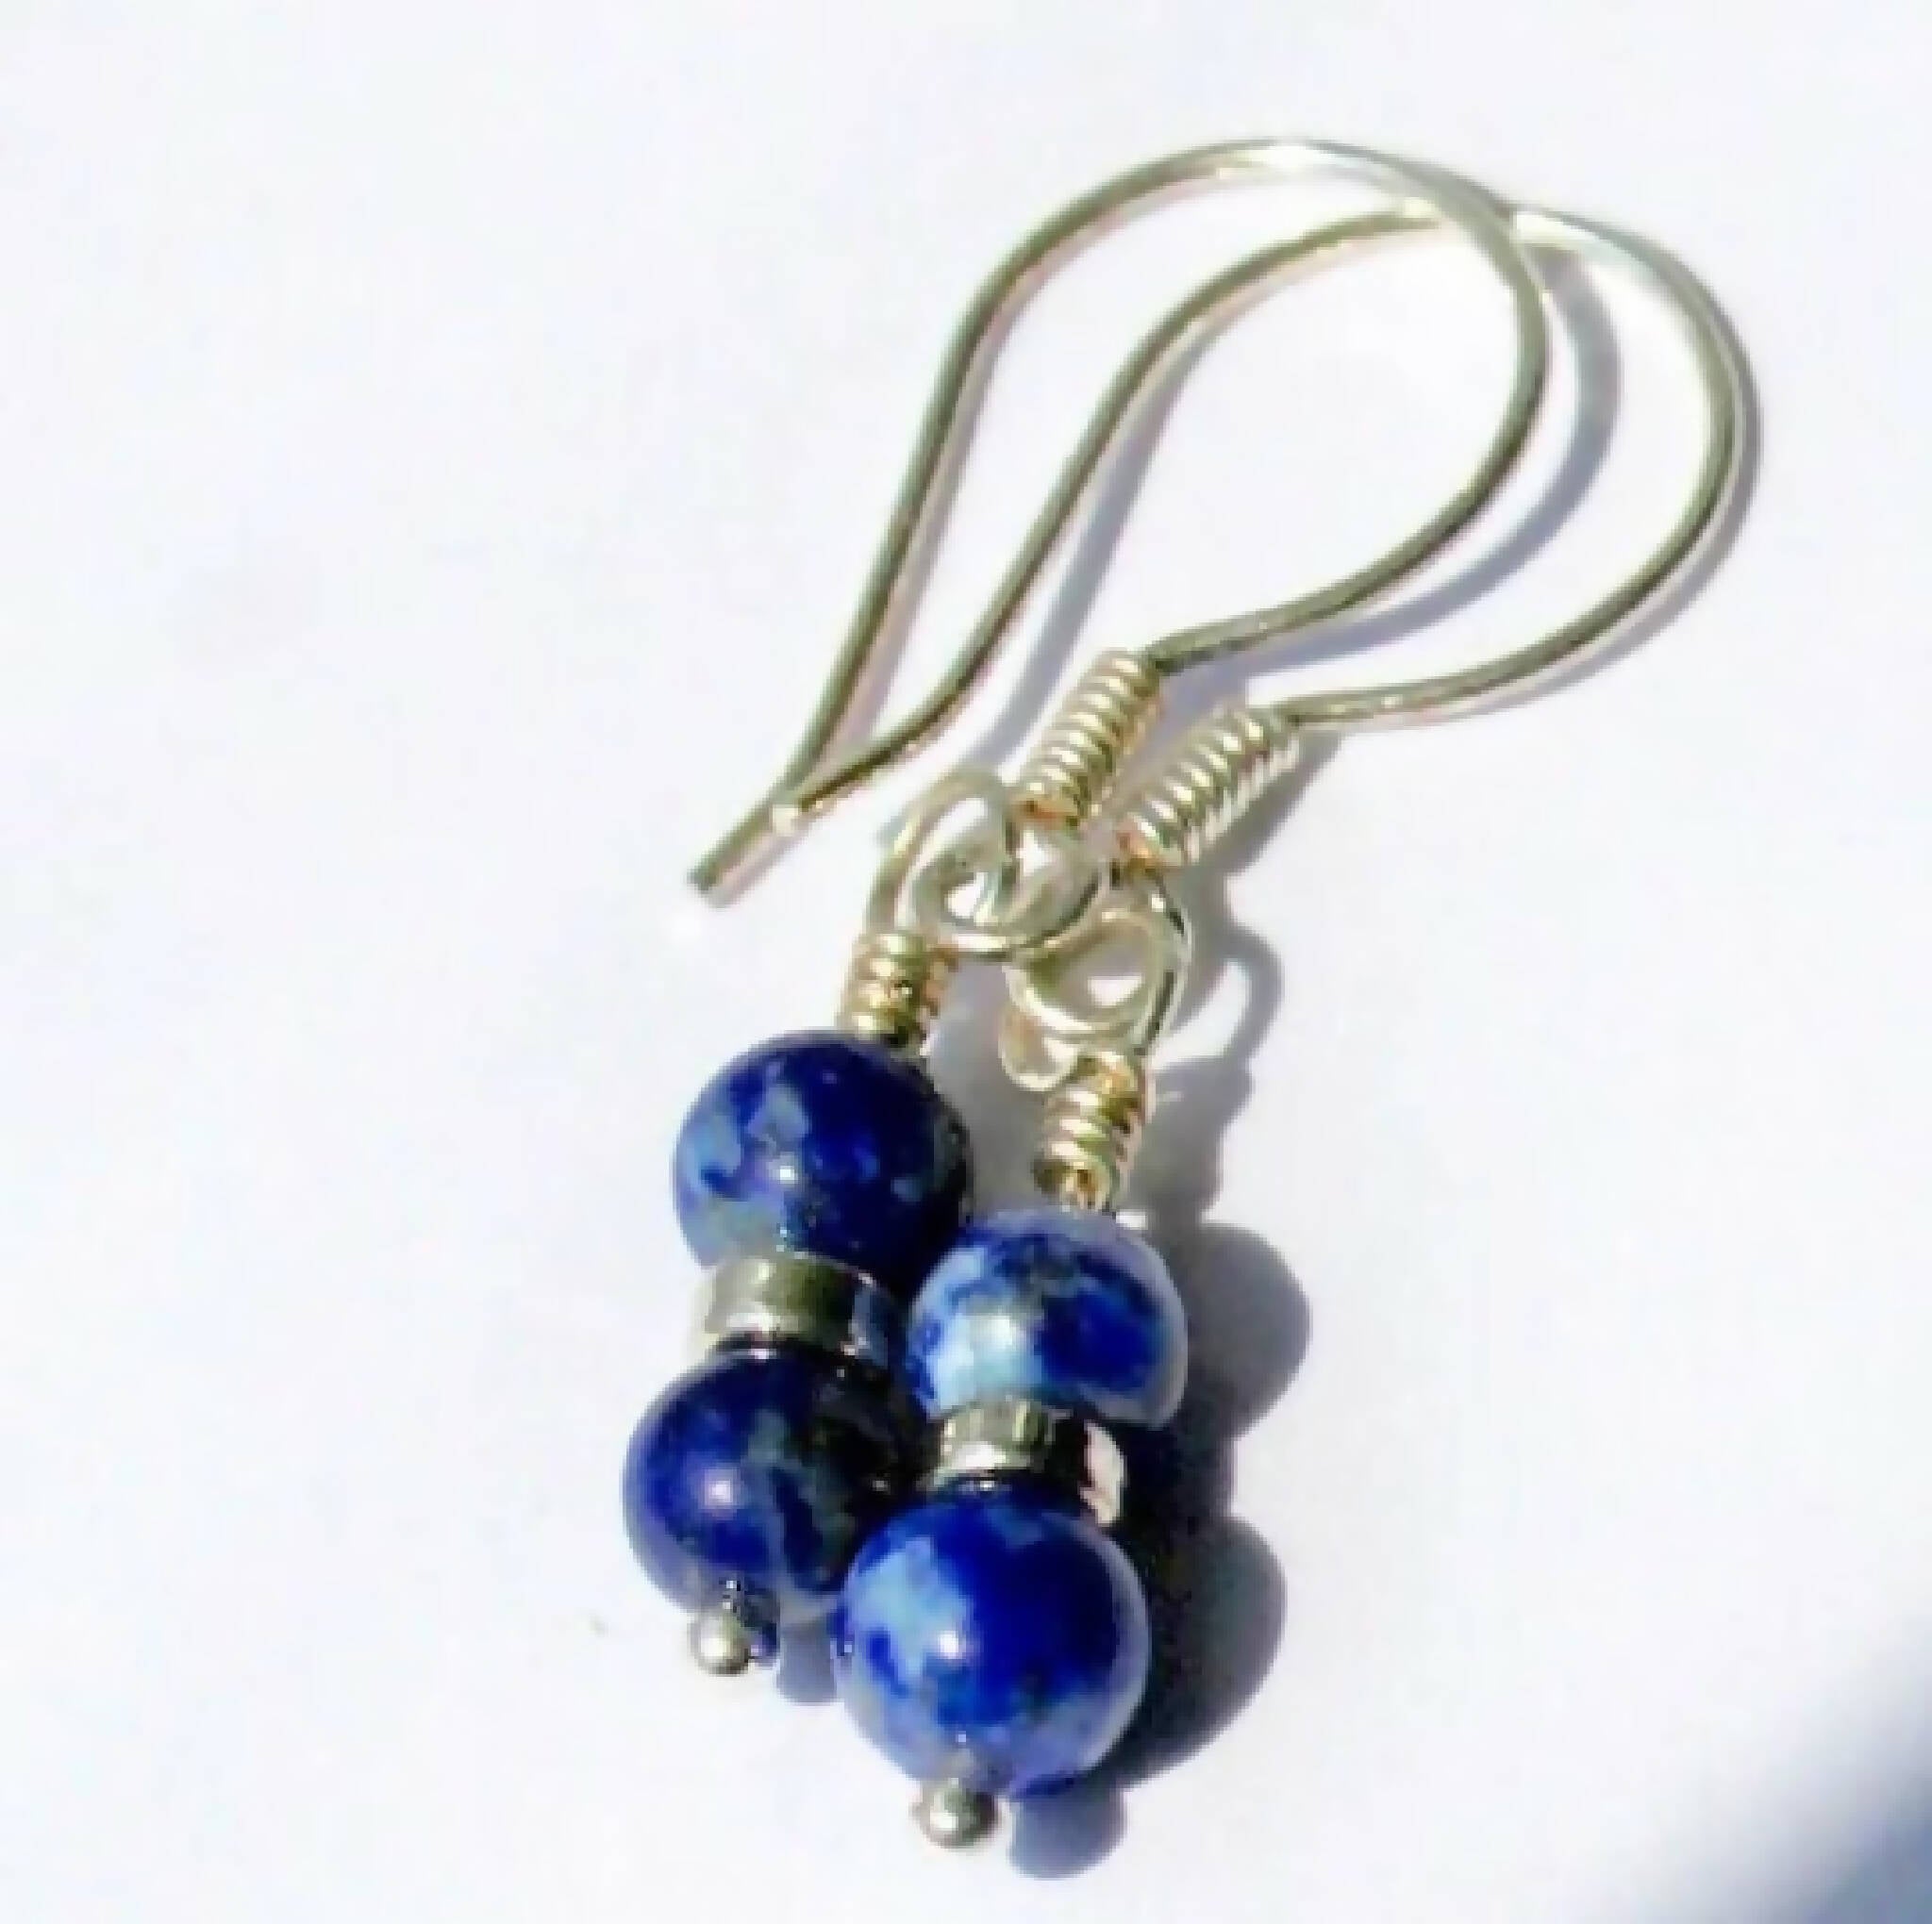 Lapis lazuli and sterling silver earrings